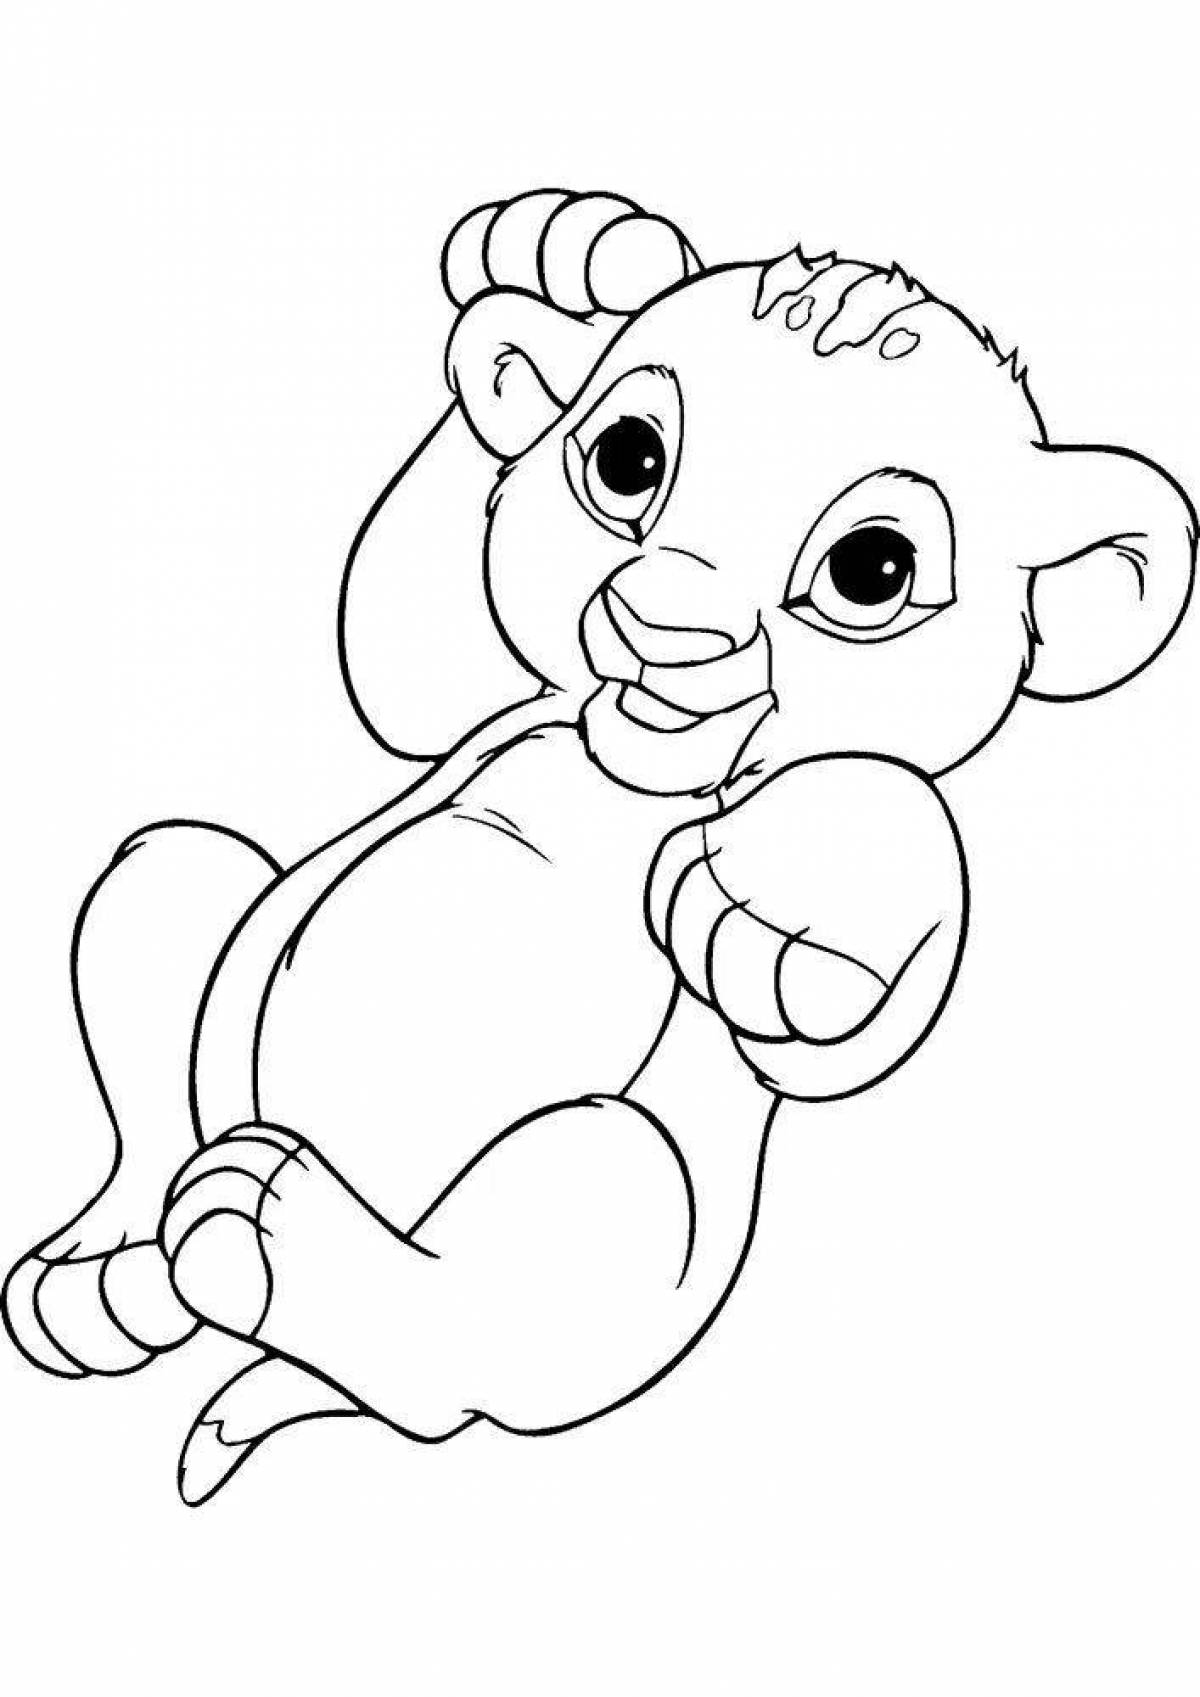 Inviting lion cub coloring page